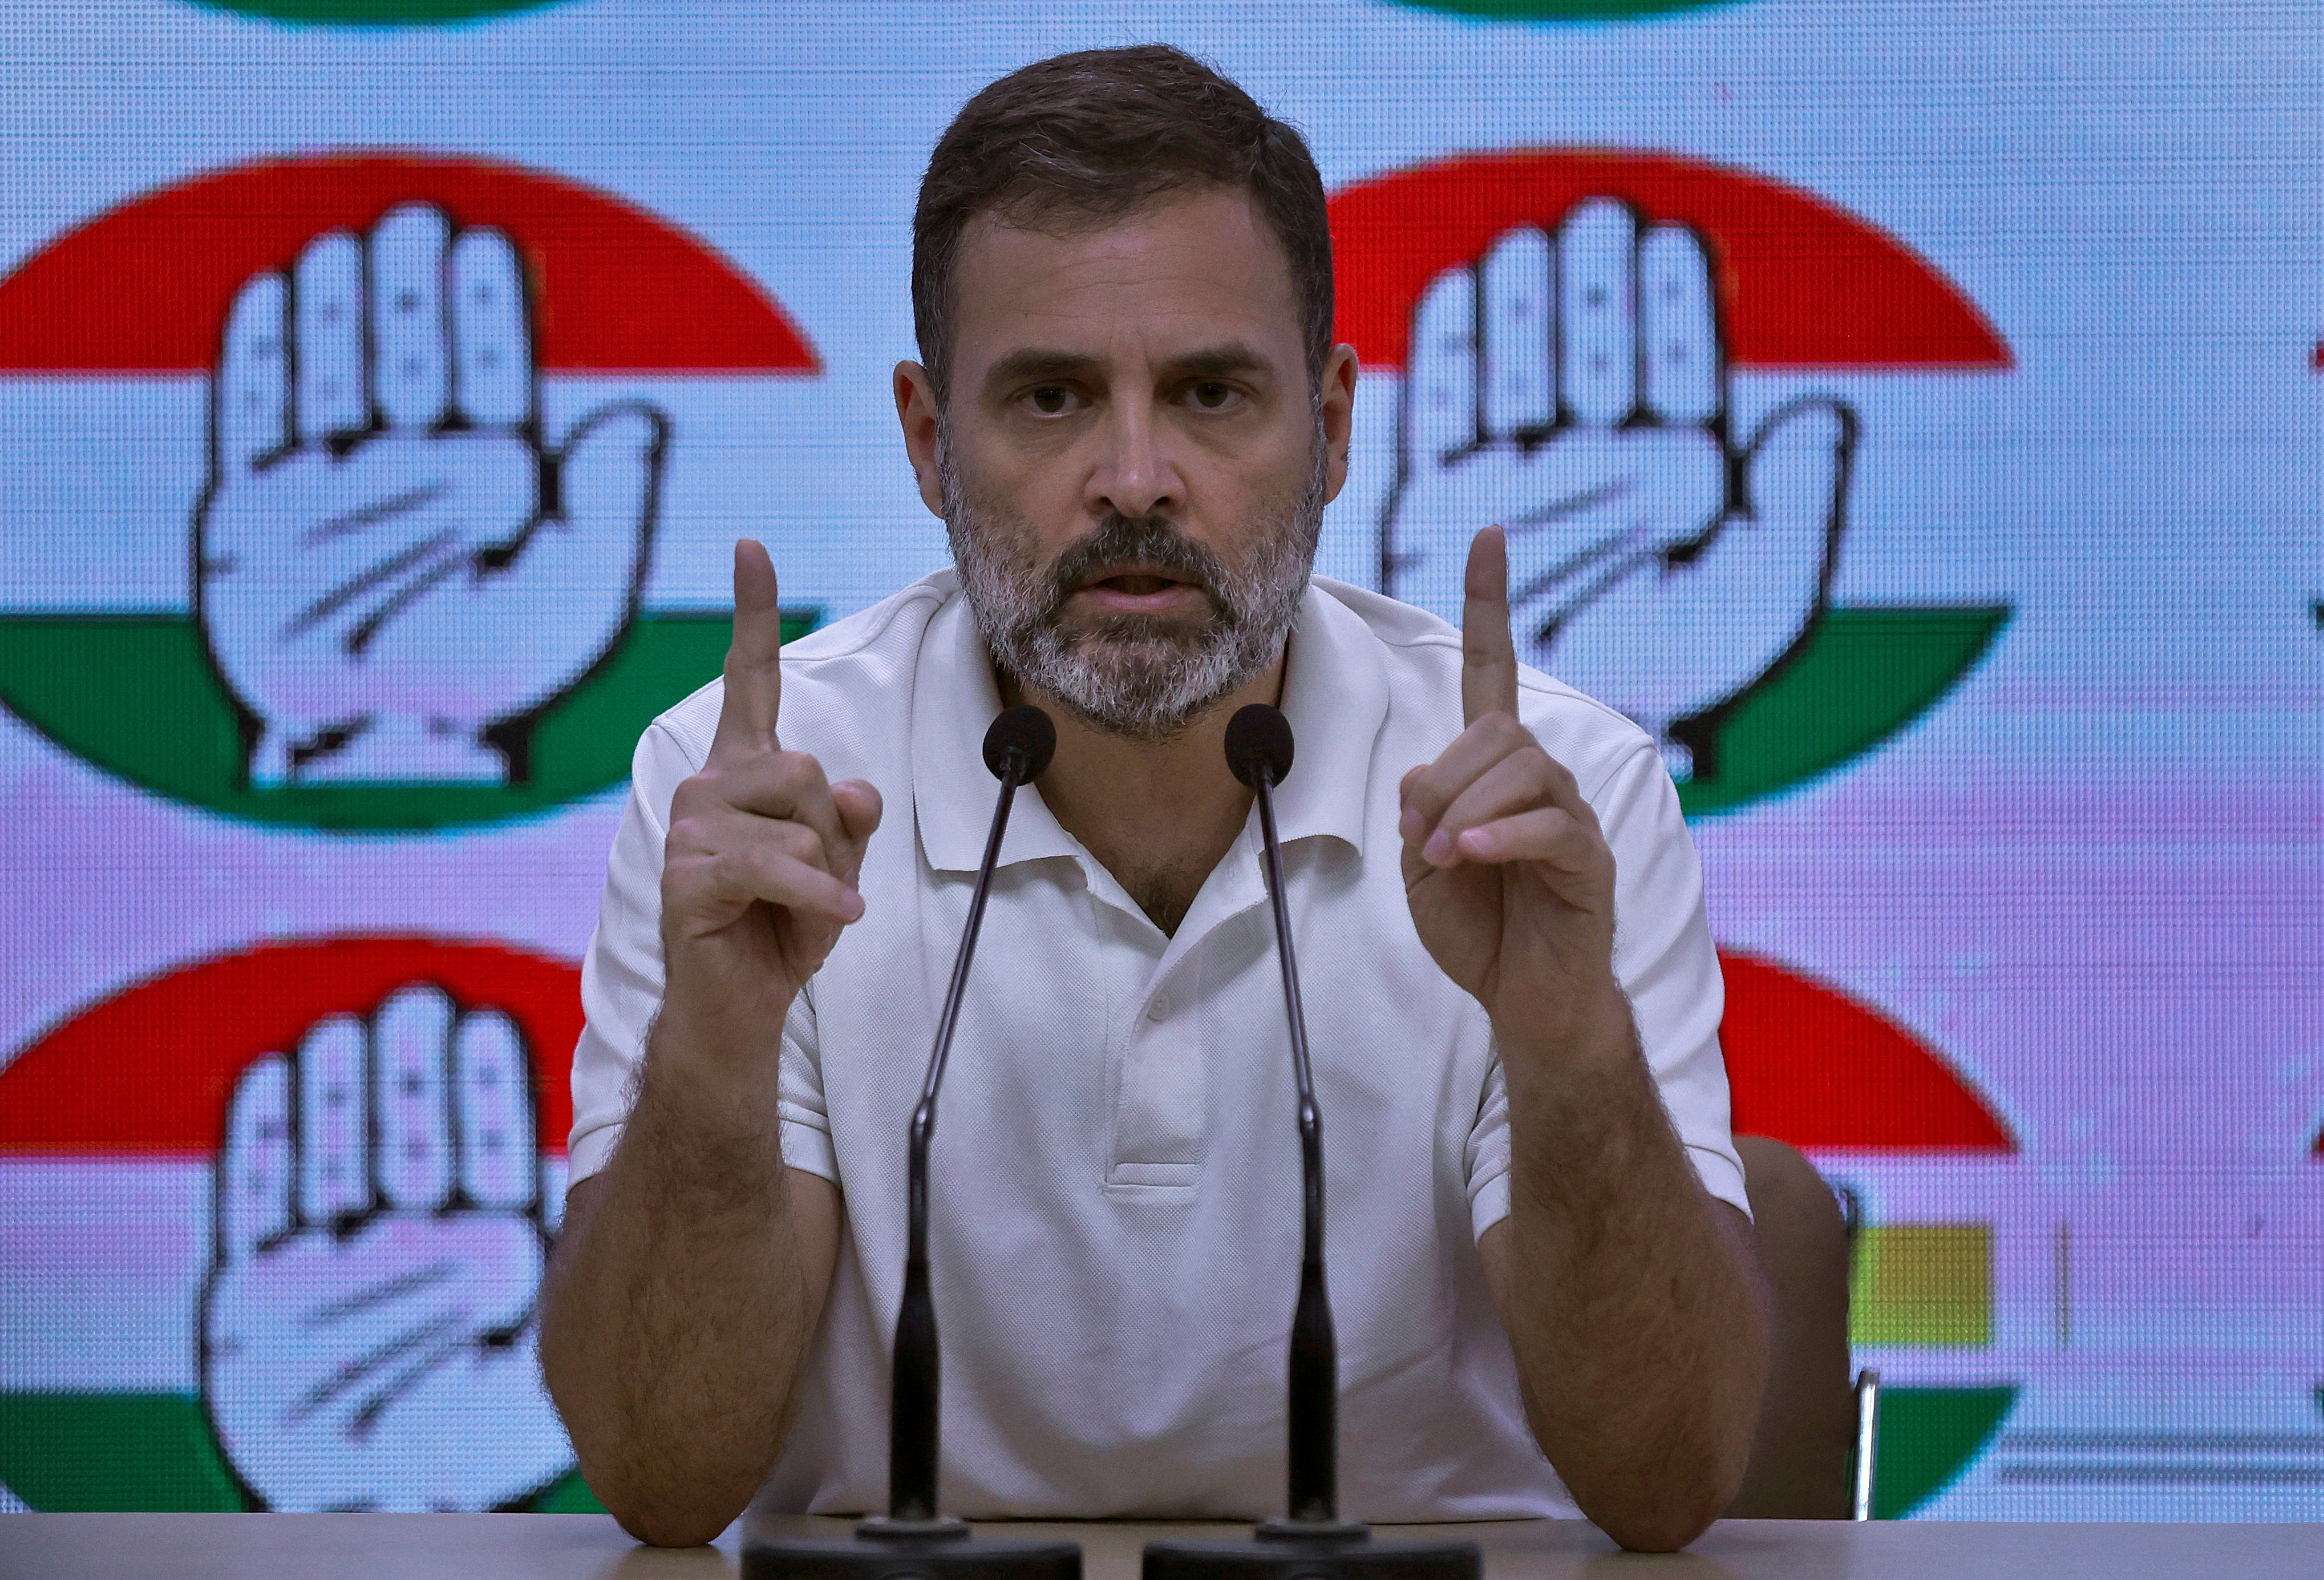 Rahul Gandhi, leader of India’s main opposition Congress party, addresses the media in New Delhi. He has said his party is leading in three of five state elections that are coming up from November to December. Photo: Reuters